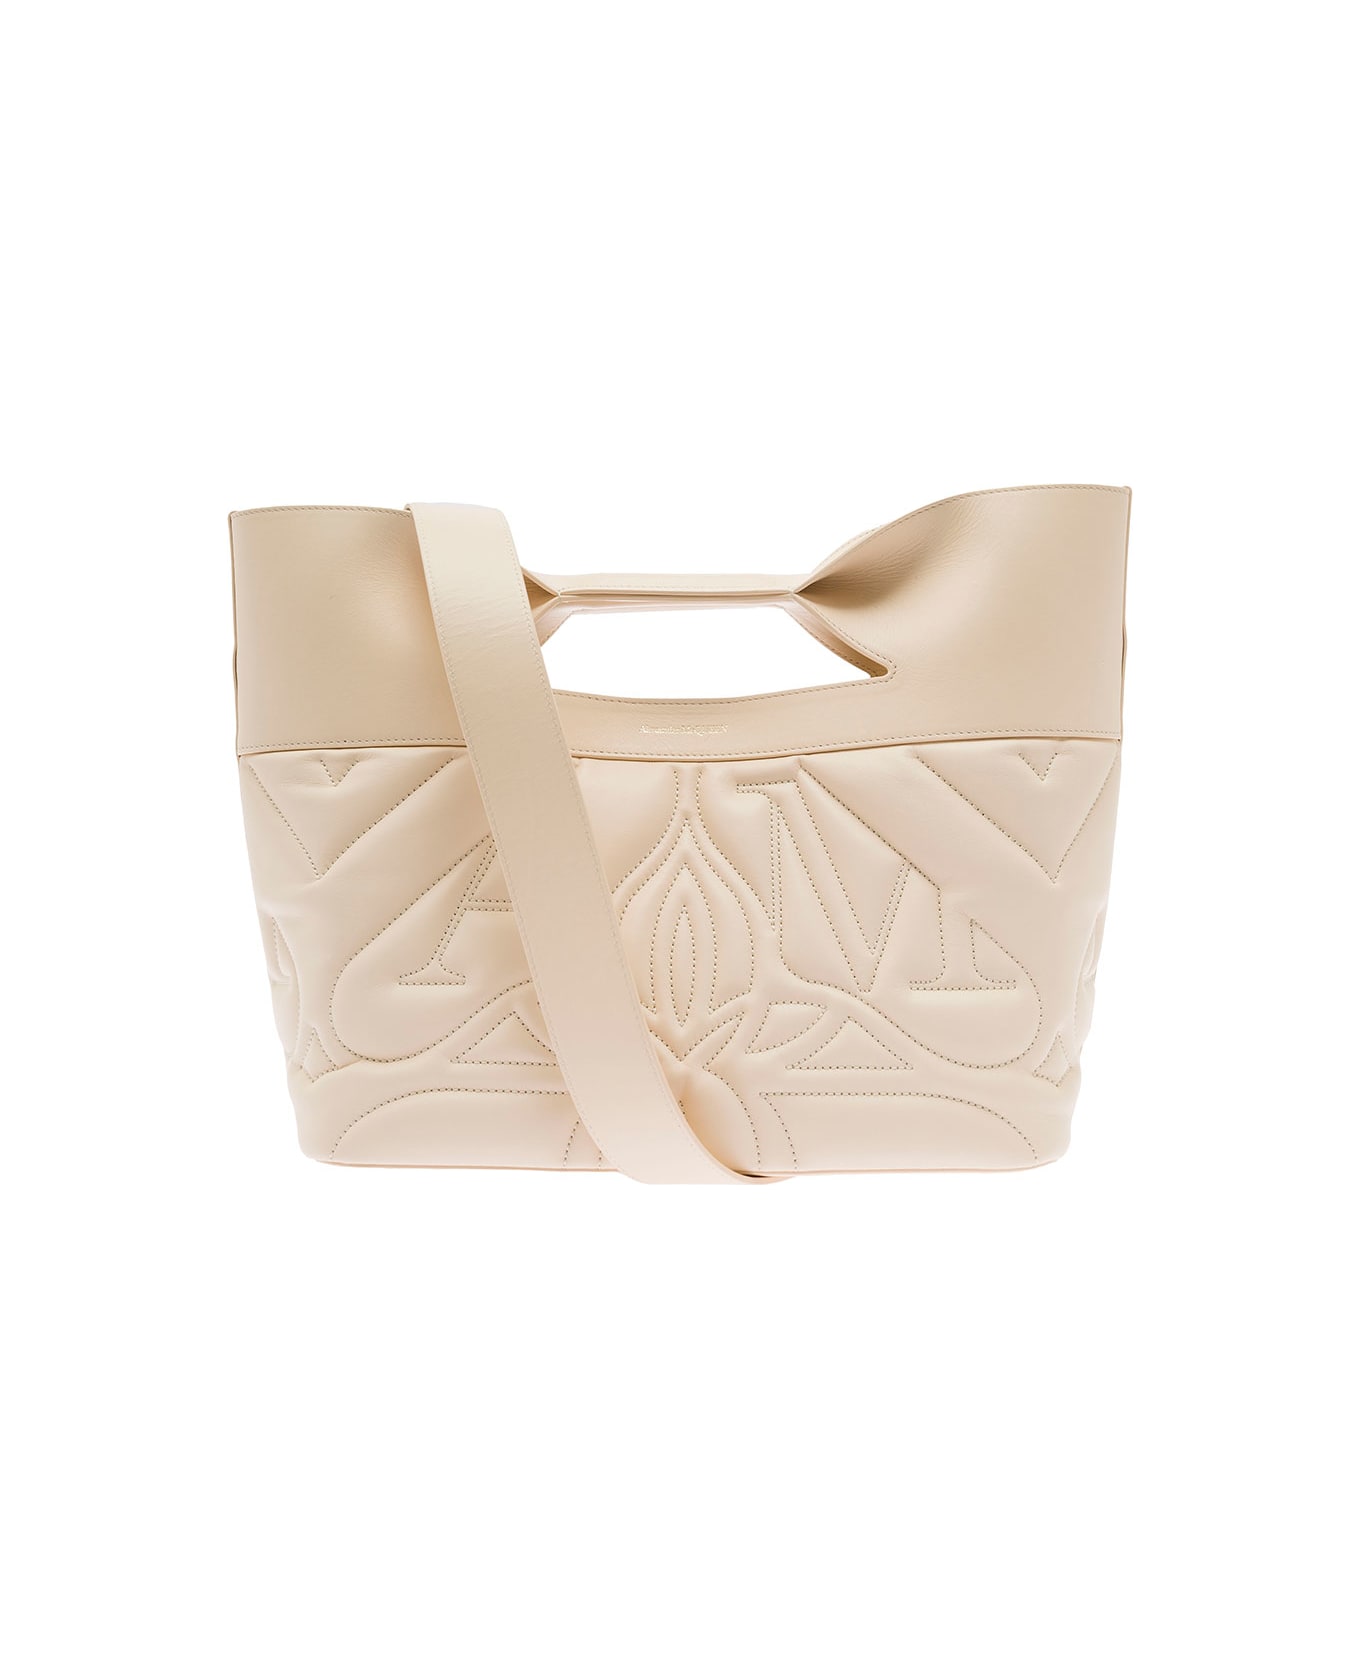 Alexander McQueen Cream White 'the Bow' Quilted Bag In Calf Leather - Beige トートバッグ